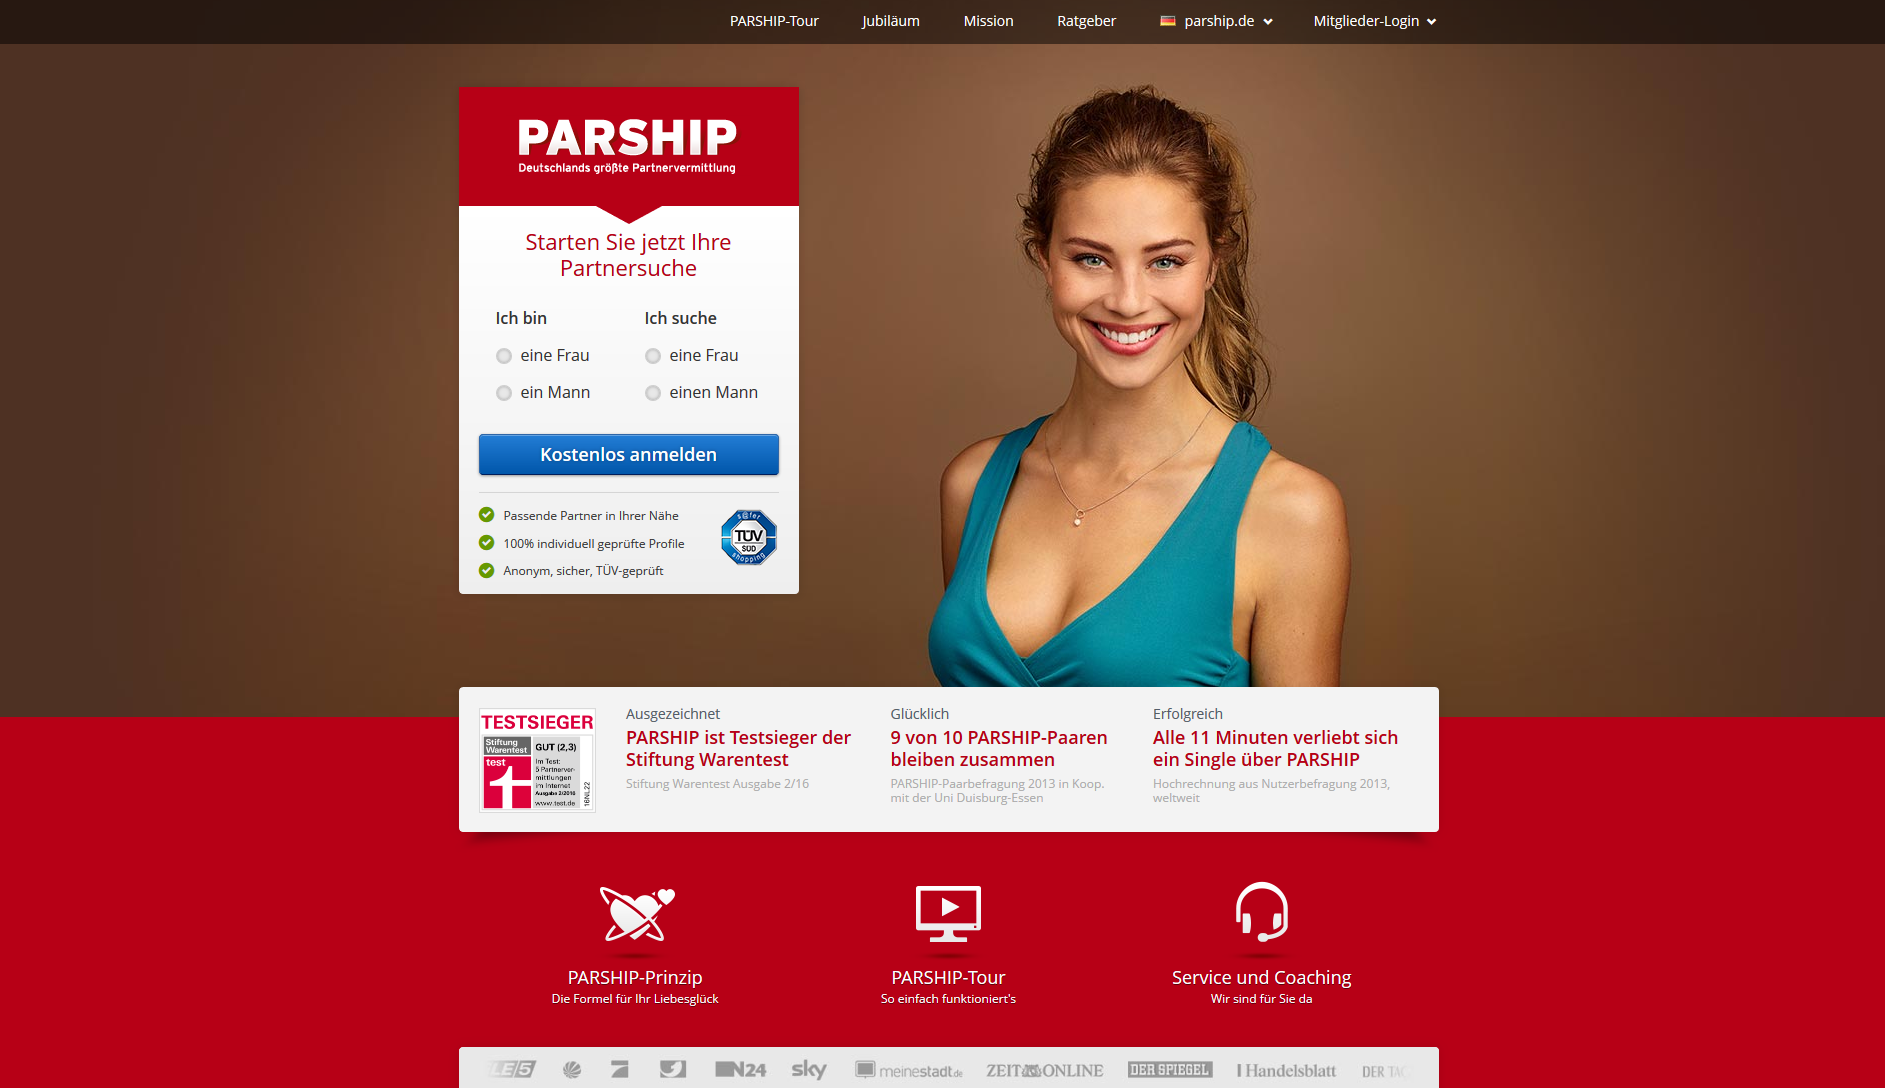 Parship dating site